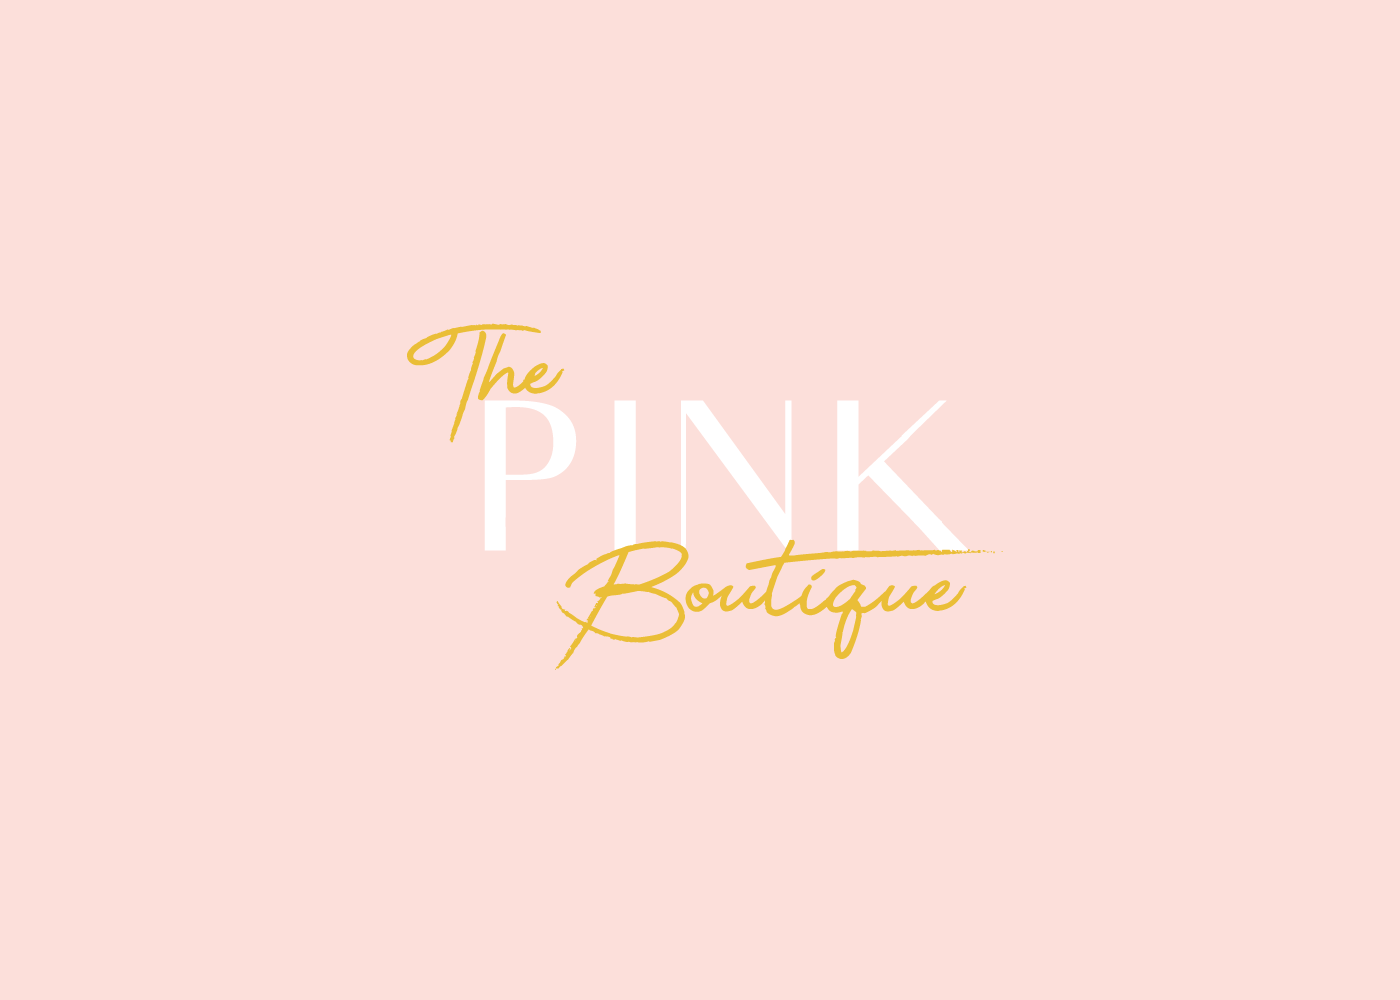 The PINK Boutique - Branding on Behance